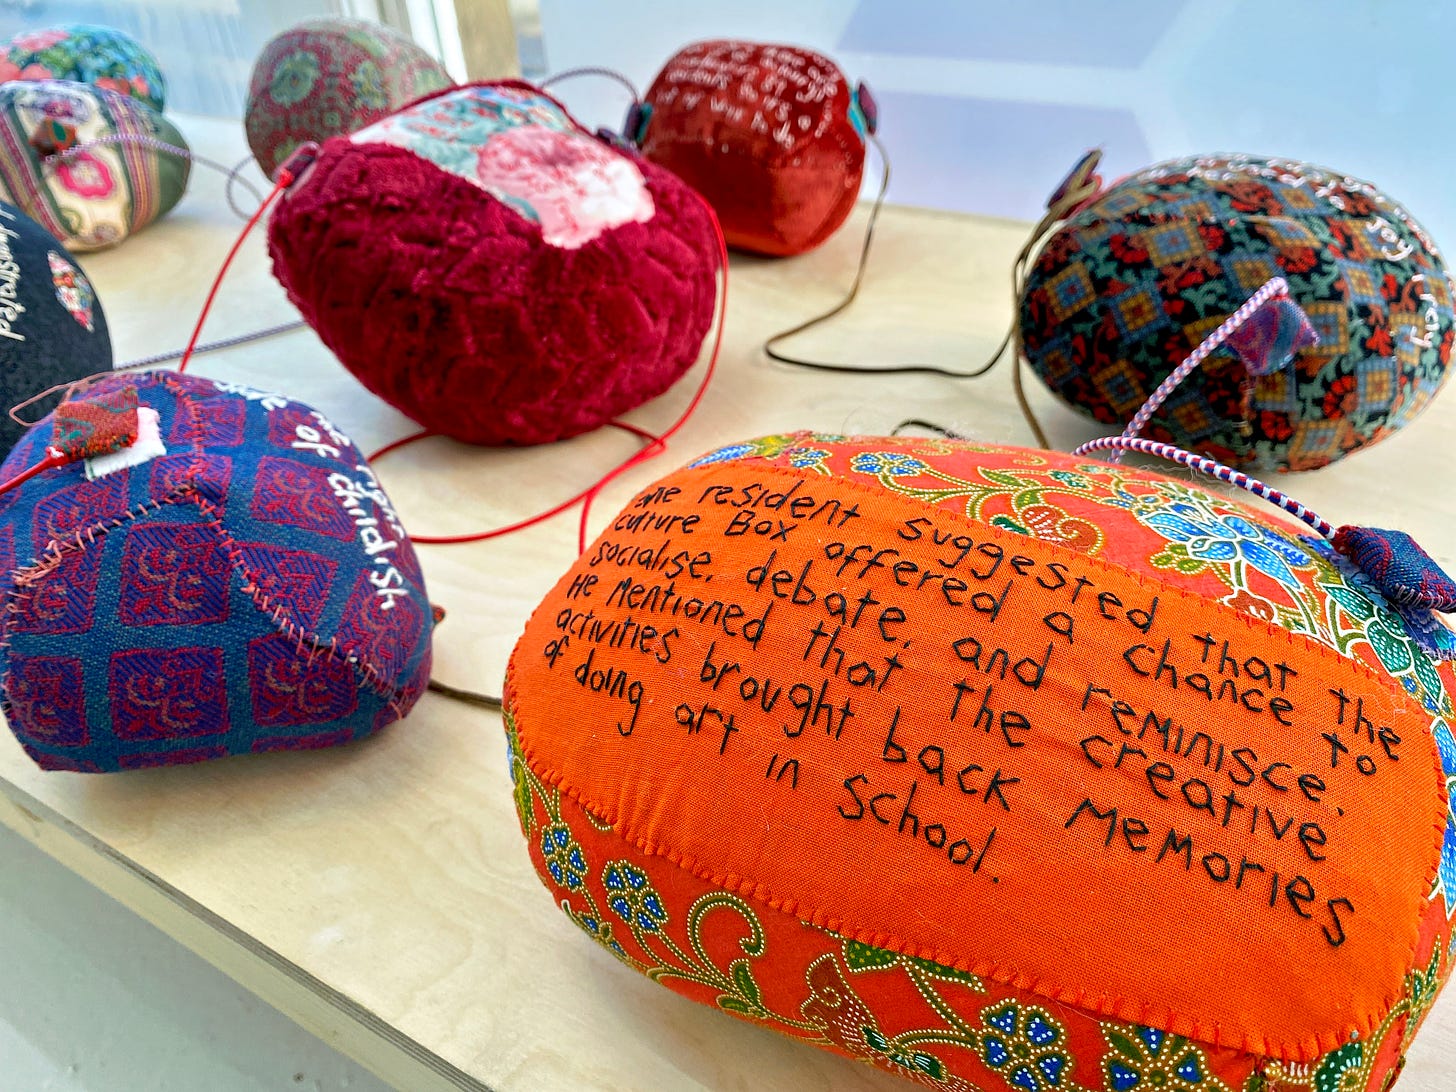 Words embroidered on small cushions reflect feedback from participants of the Culture Box project.